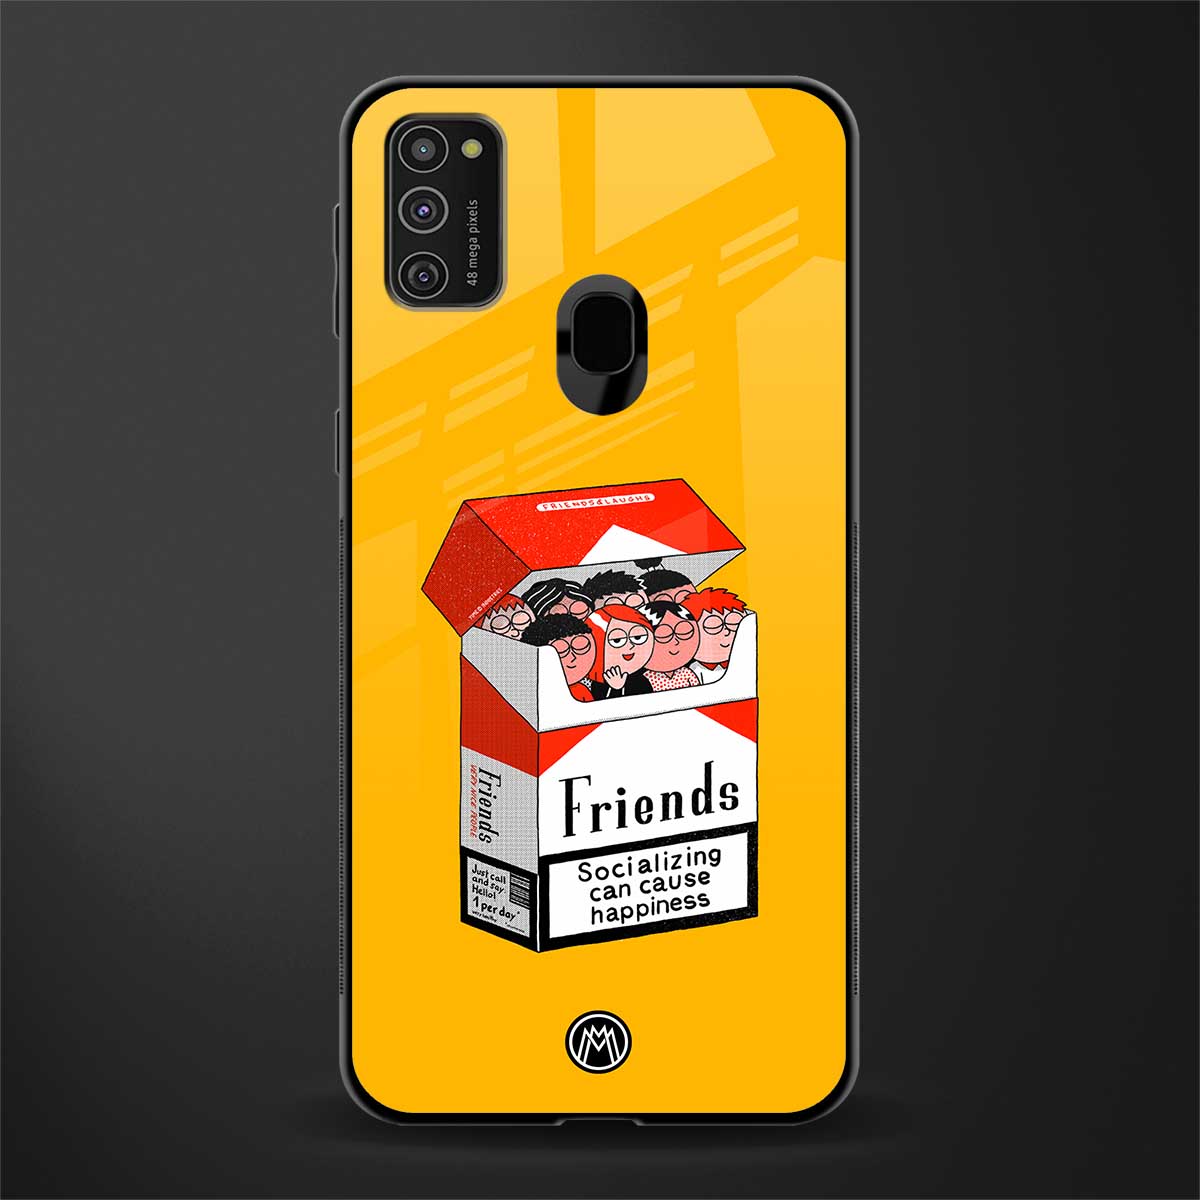 socializing can cause happiness glass case for samsung galaxy m30s image